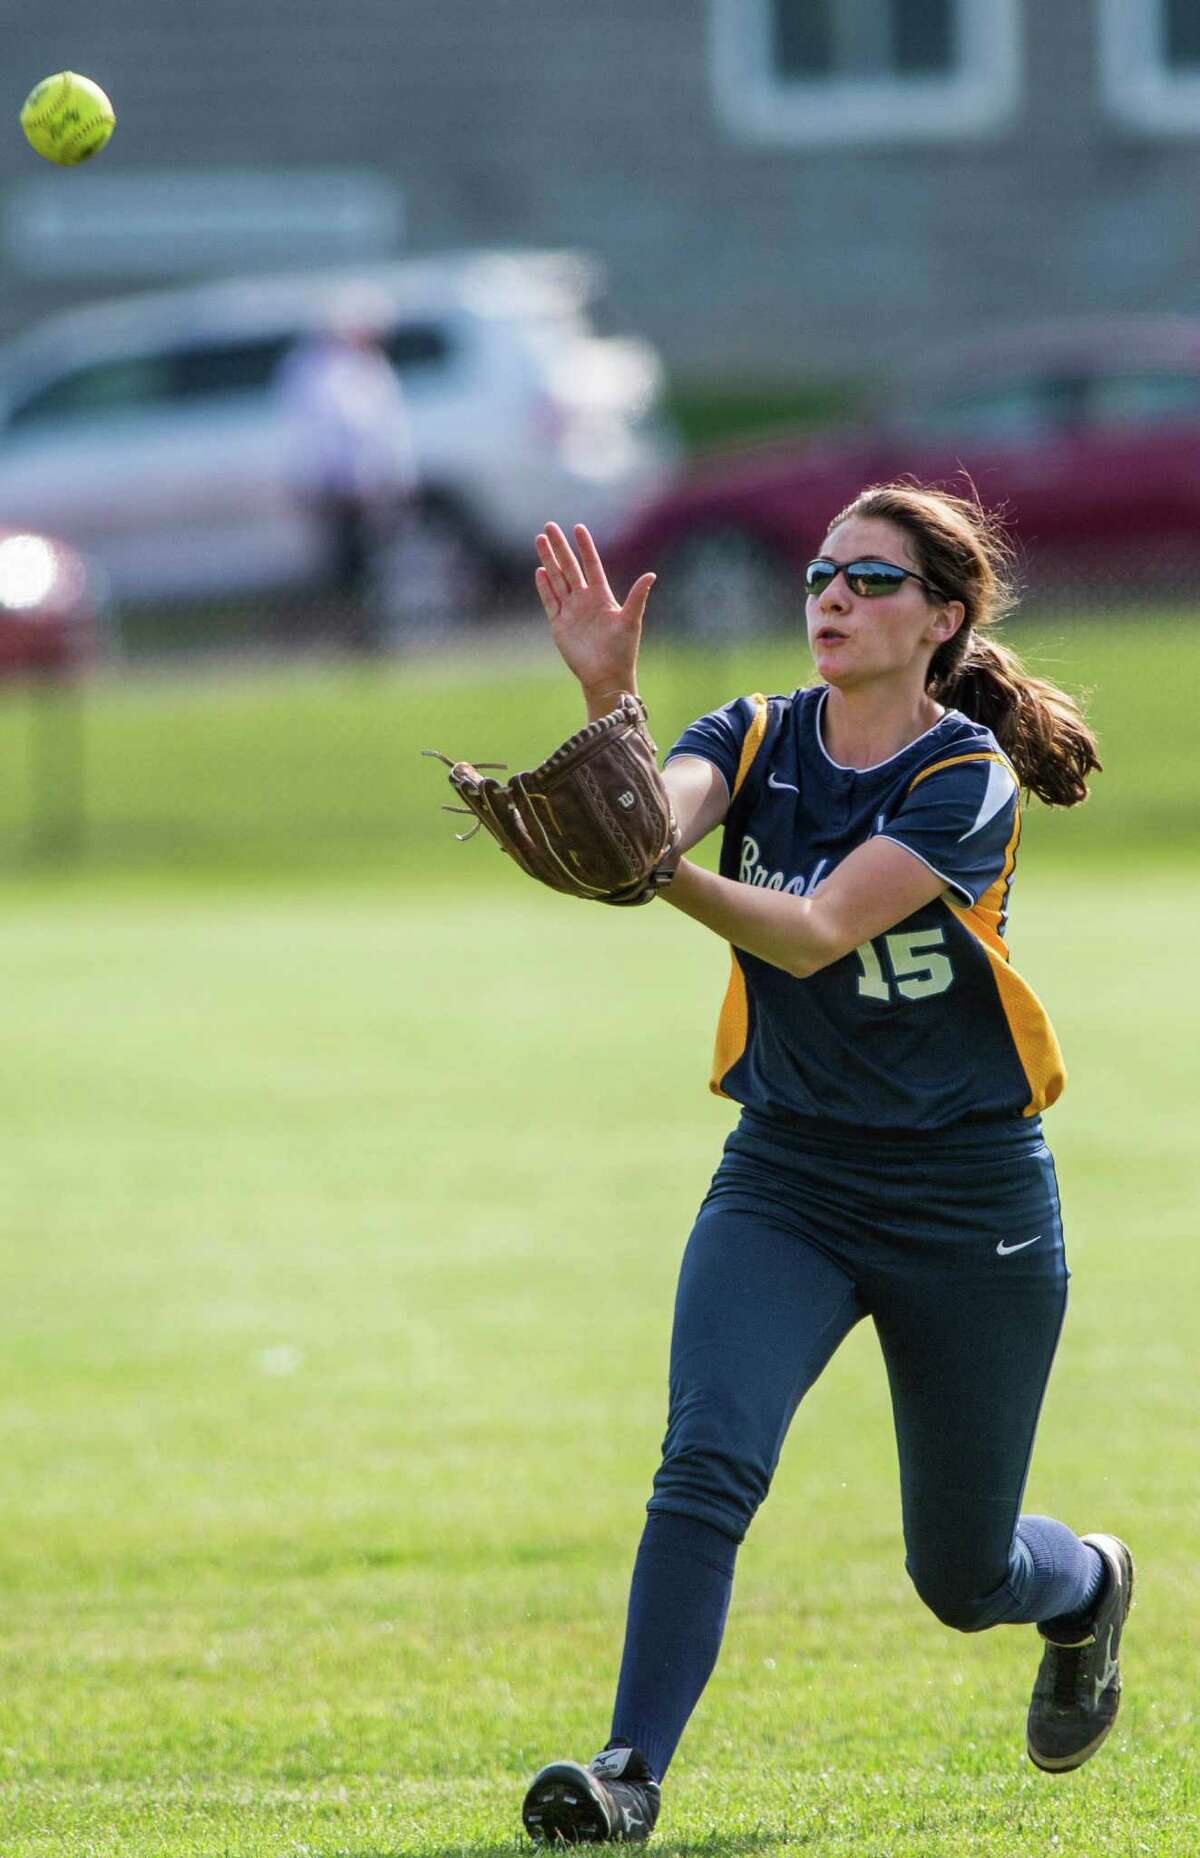 FILE PHOTO: Brookfield high school outfielder Heather Morey makes a catch during a first round game of the CIAC girls softball tournament against New Fairfield high school played at Brookfield high school, Brookfield, CT on Wednesday, June 3rd, 2015.